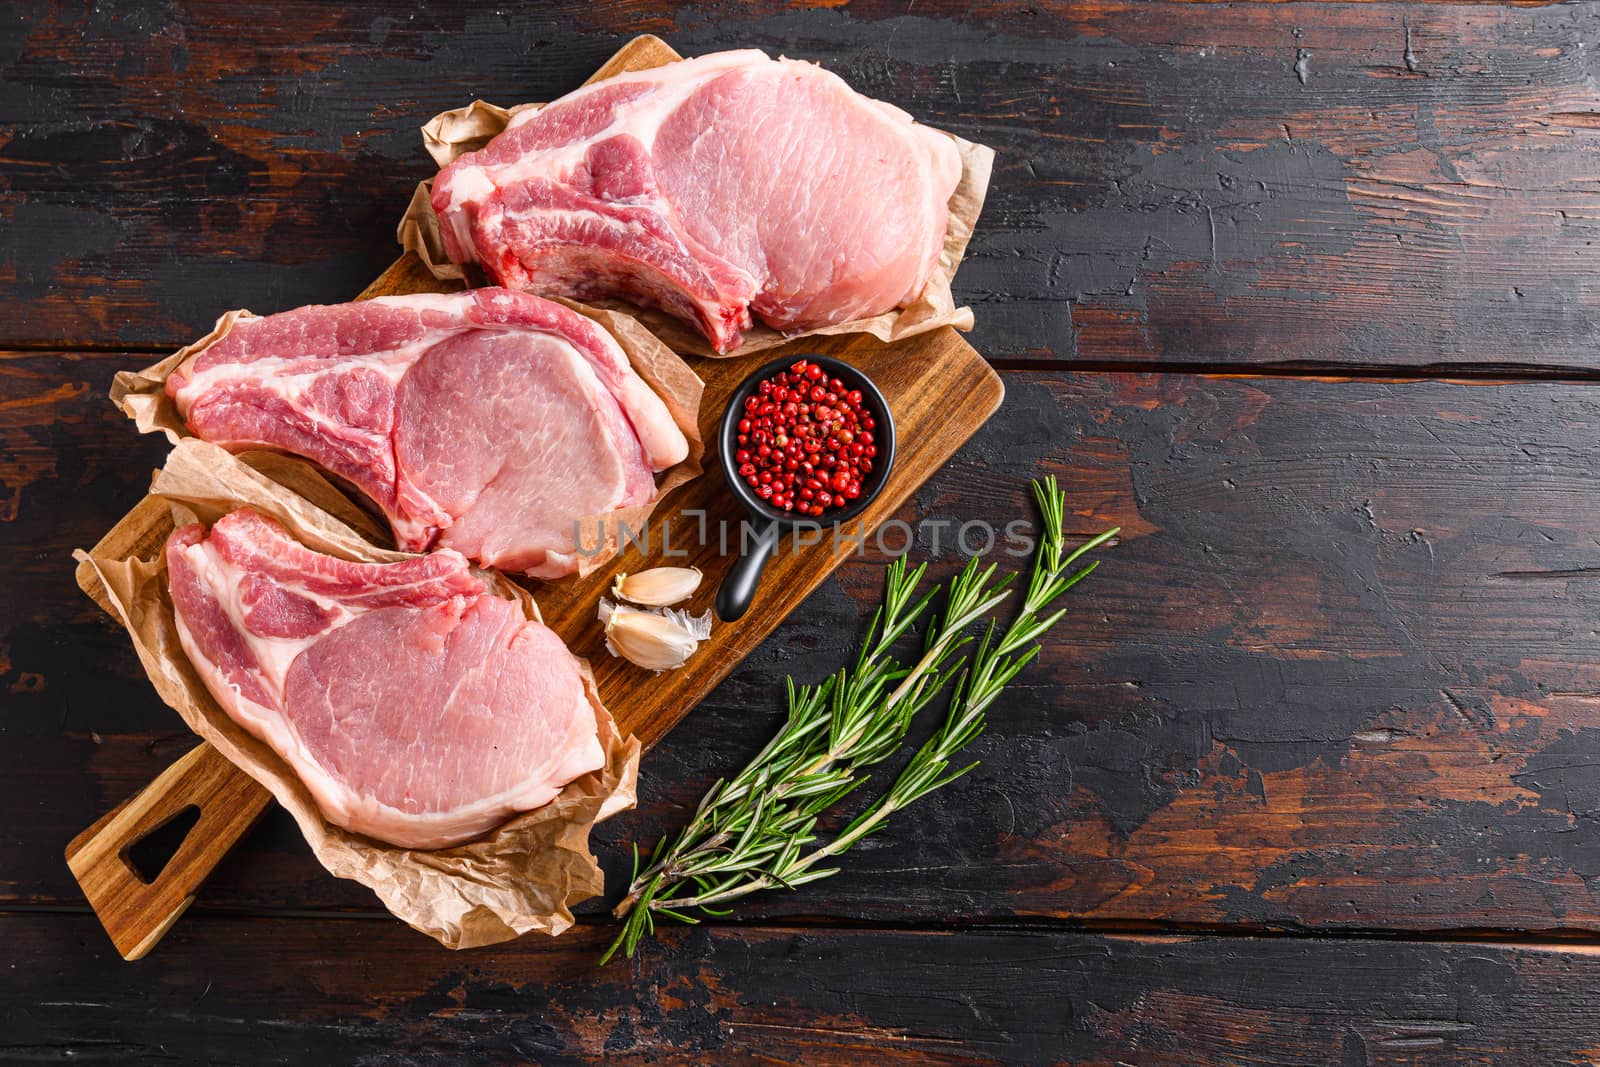 barbecue pork portion set over old rustic dark wood table with herbs and ingrefients top view space for text.